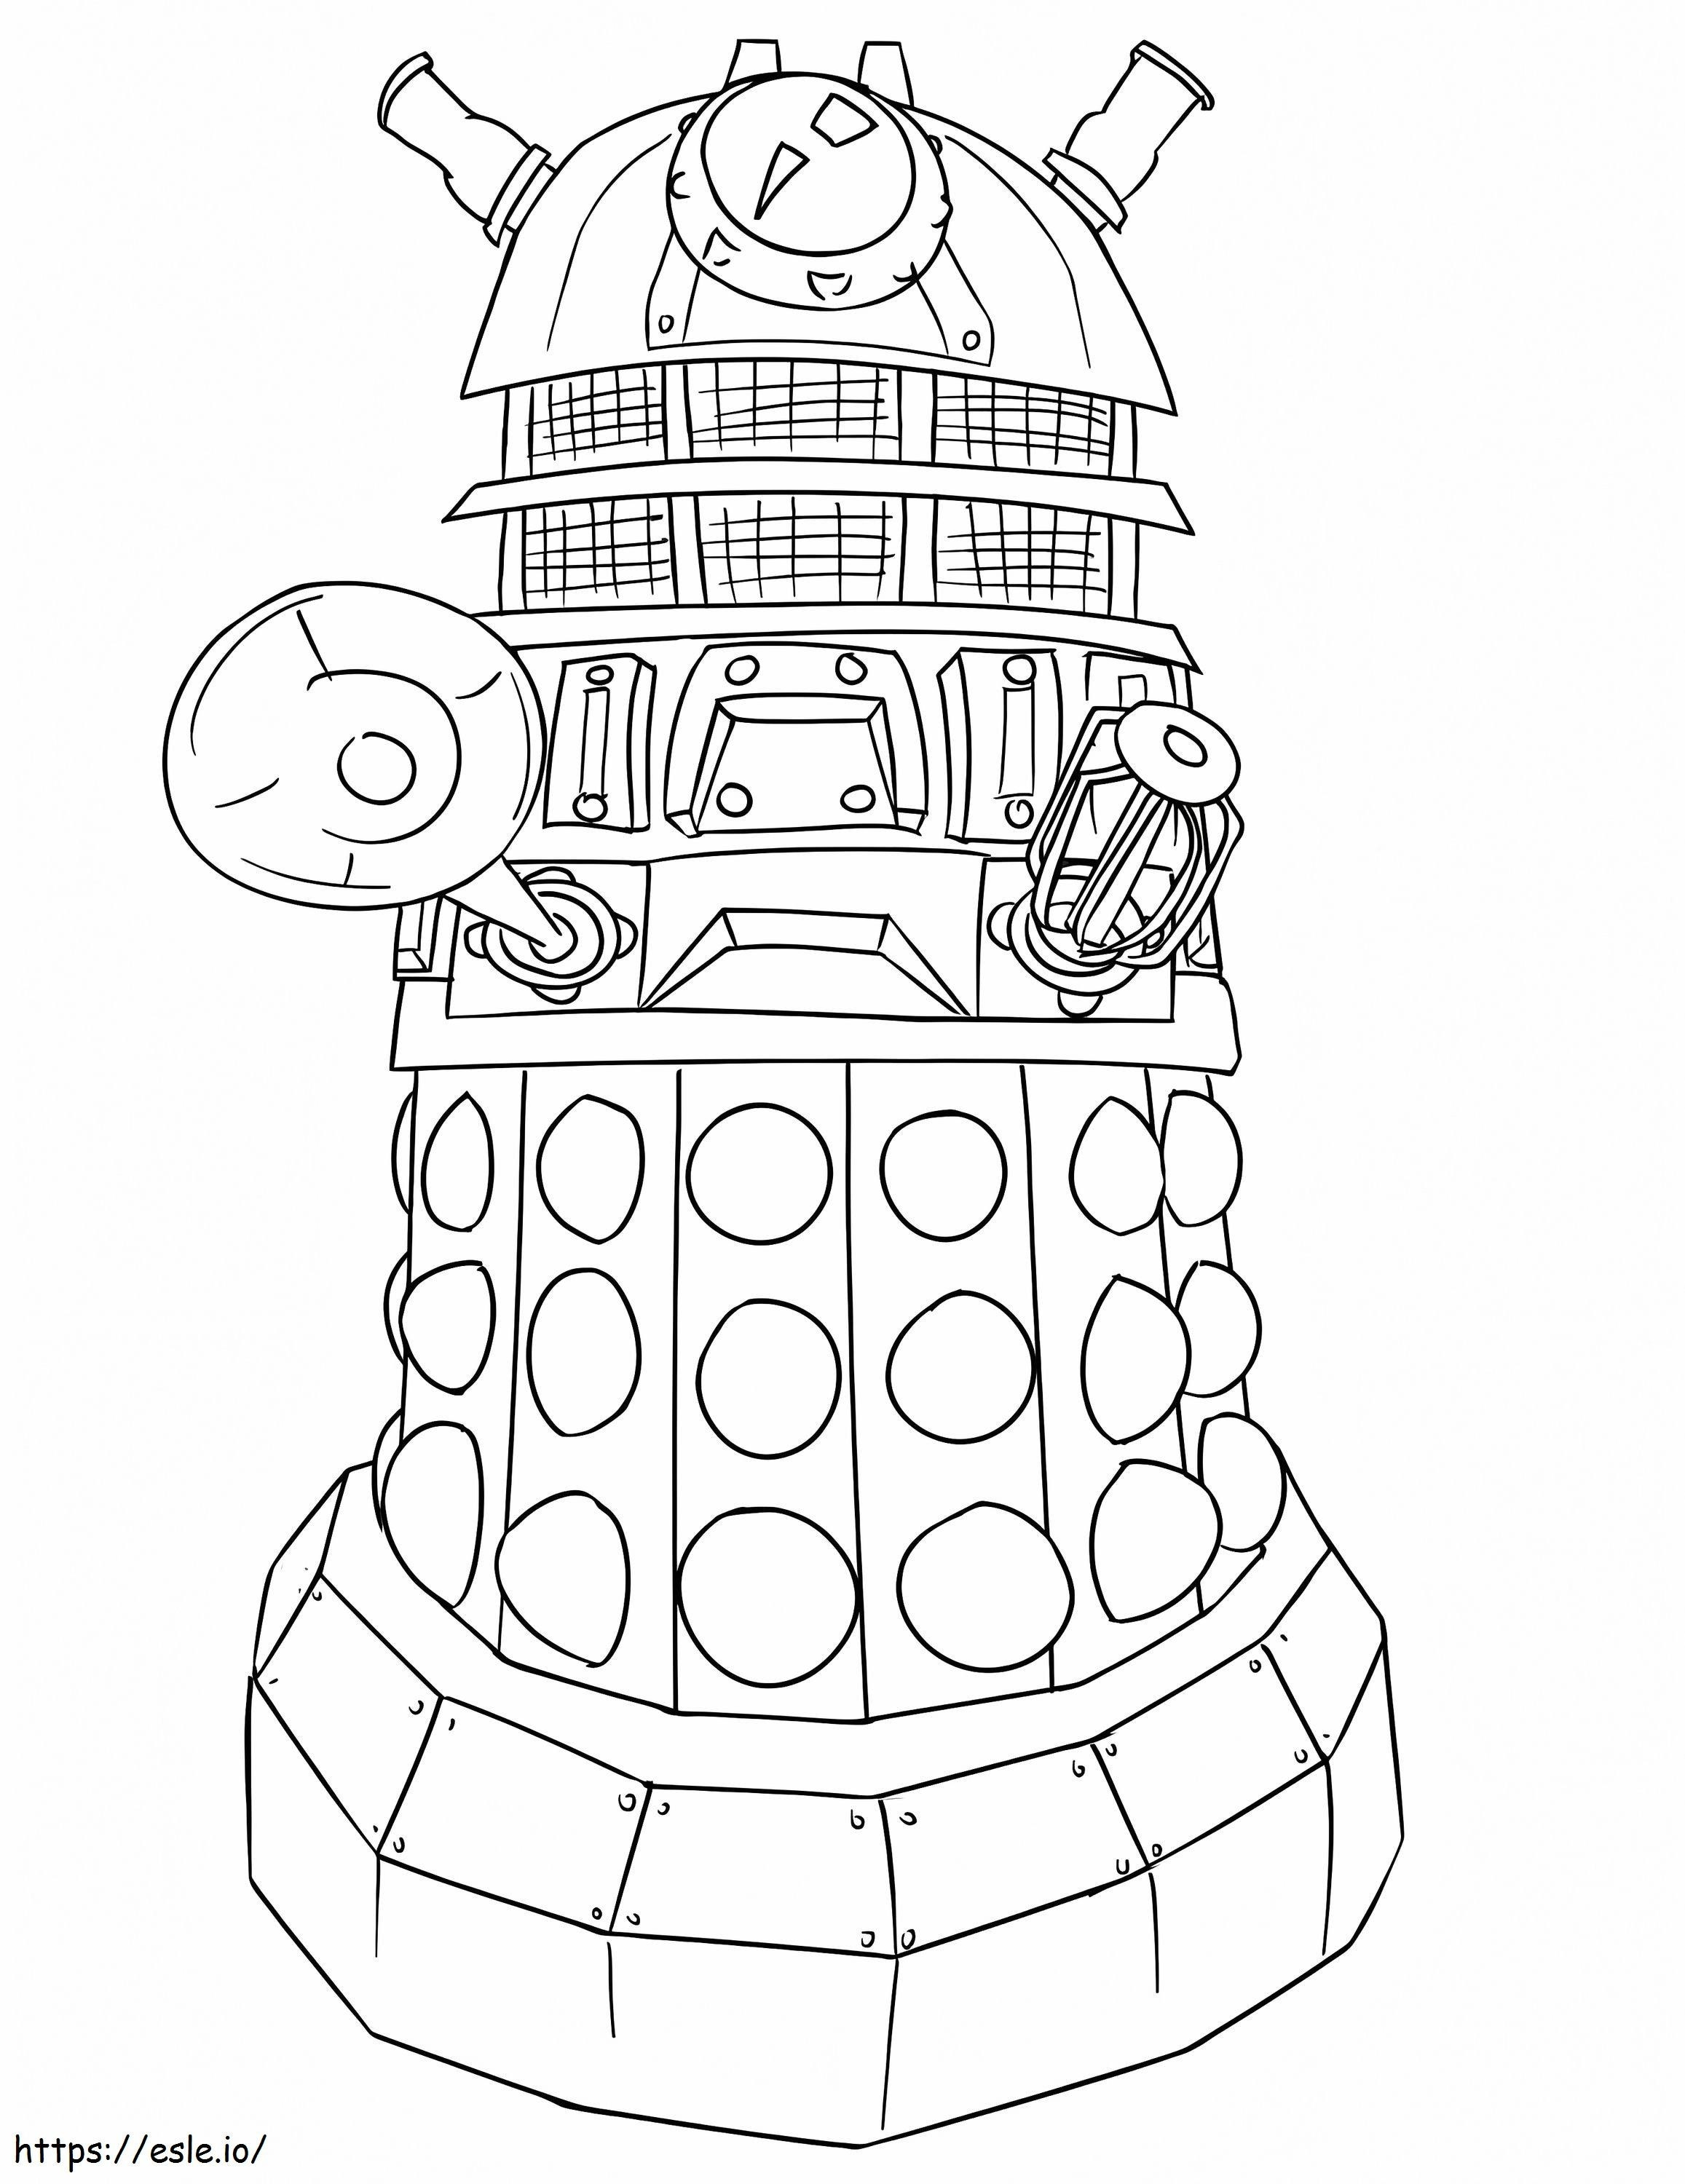 Doctor Who Dalek coloring page